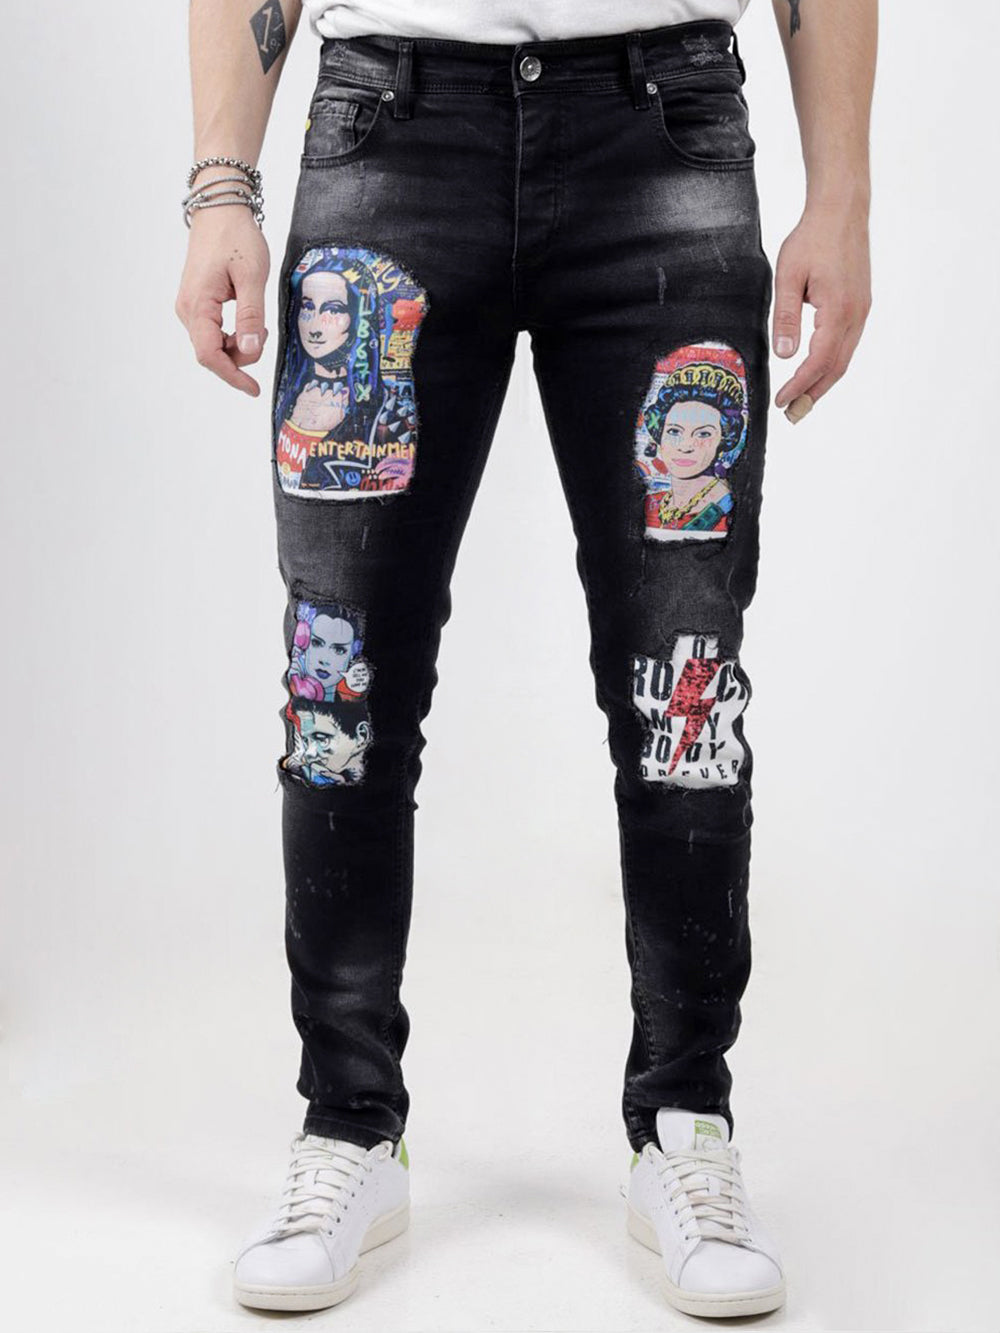 A man wearing a pair of MOONLISA black denim jeans with embroidered patches.